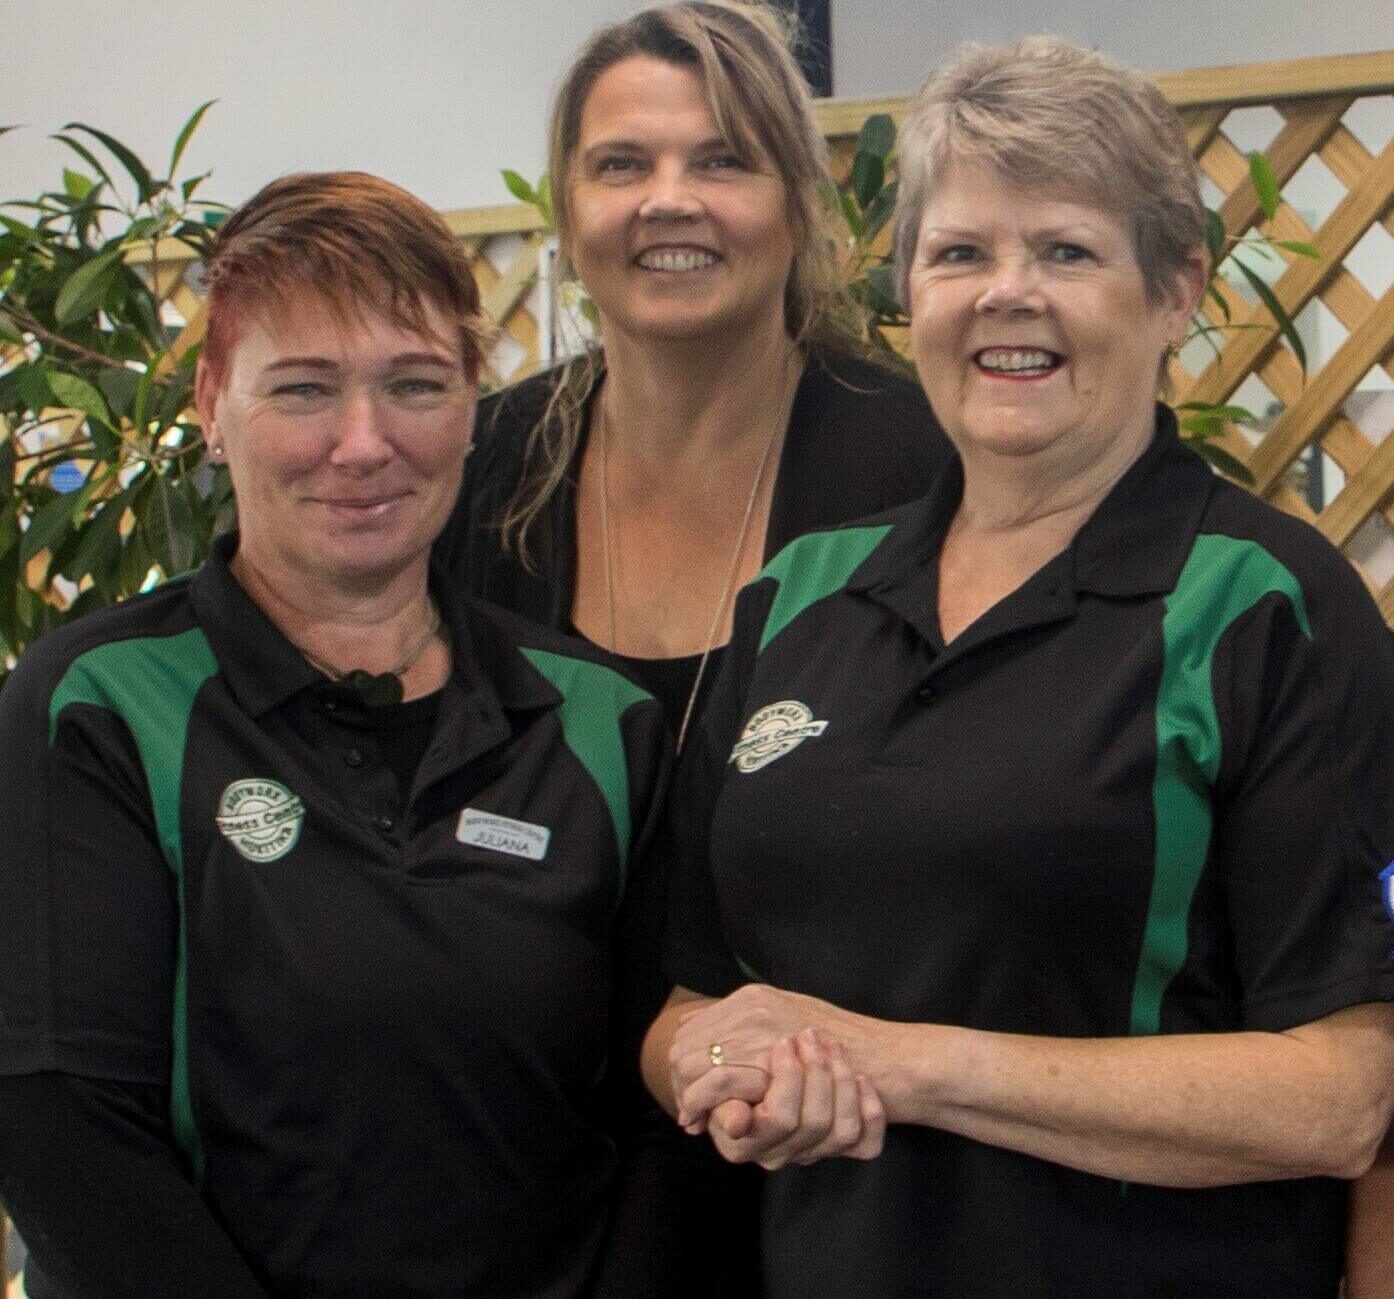 Three women standing together, two wearing matching black and green collared shirts with a logo, the middle woman in a black top. They are smiling and posing for the photo in front of a plant.